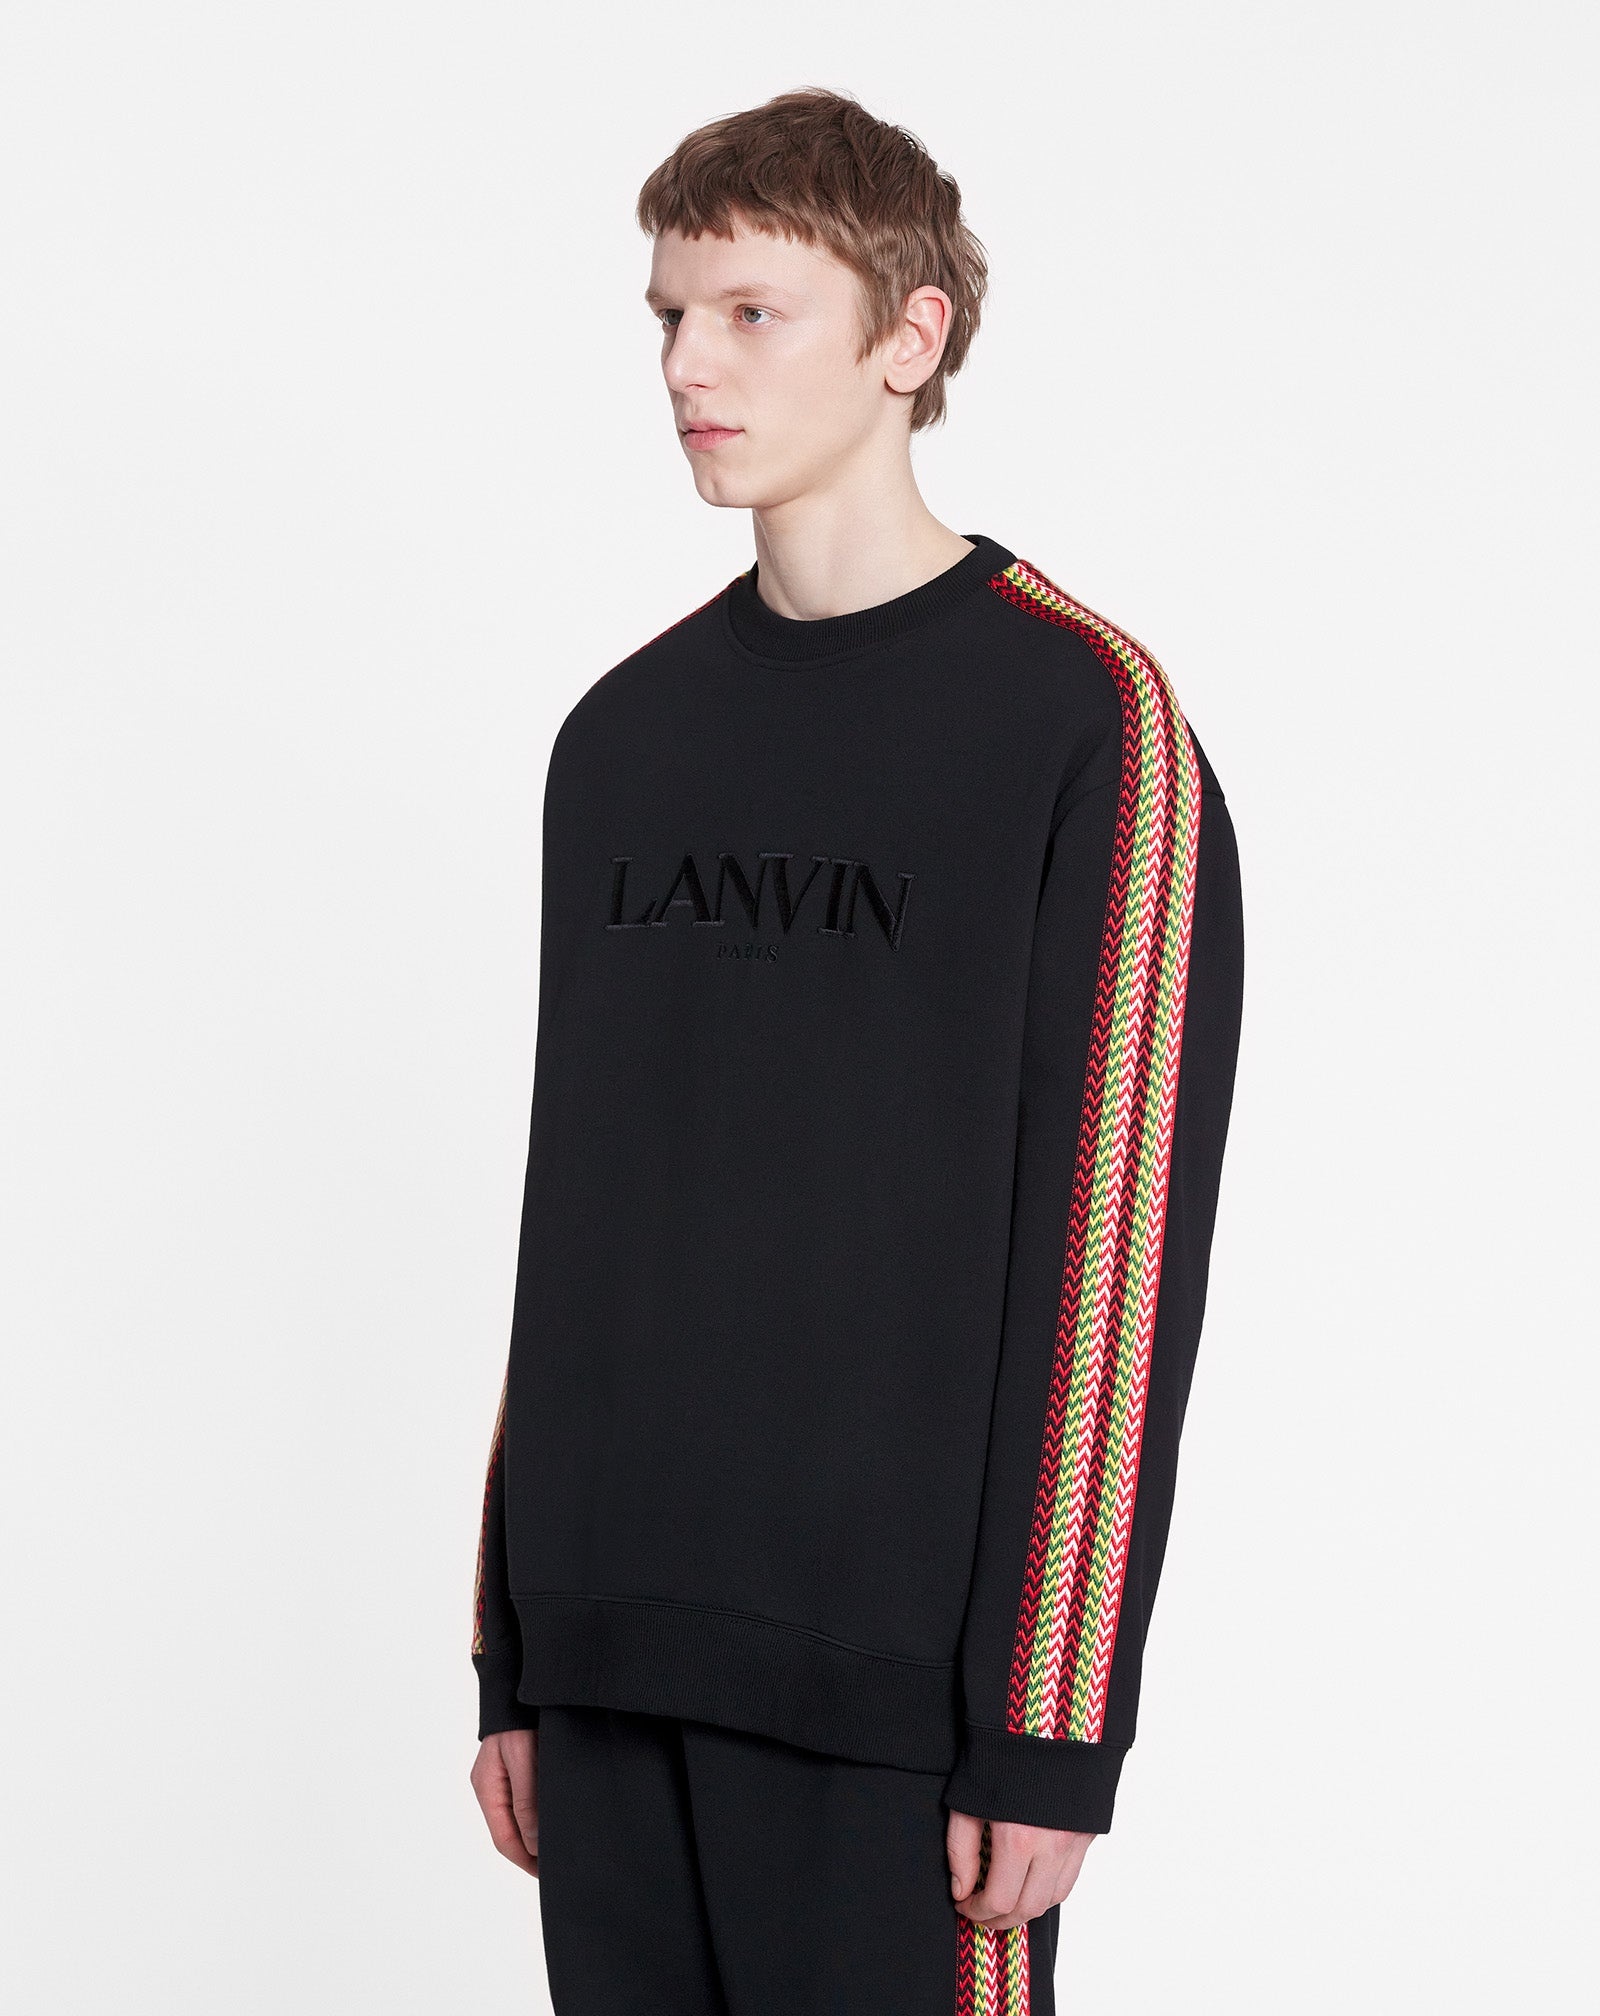 OVERSIZED LANVIN EMBROIDERED SIDE CURB SWEATSHIRT - 3